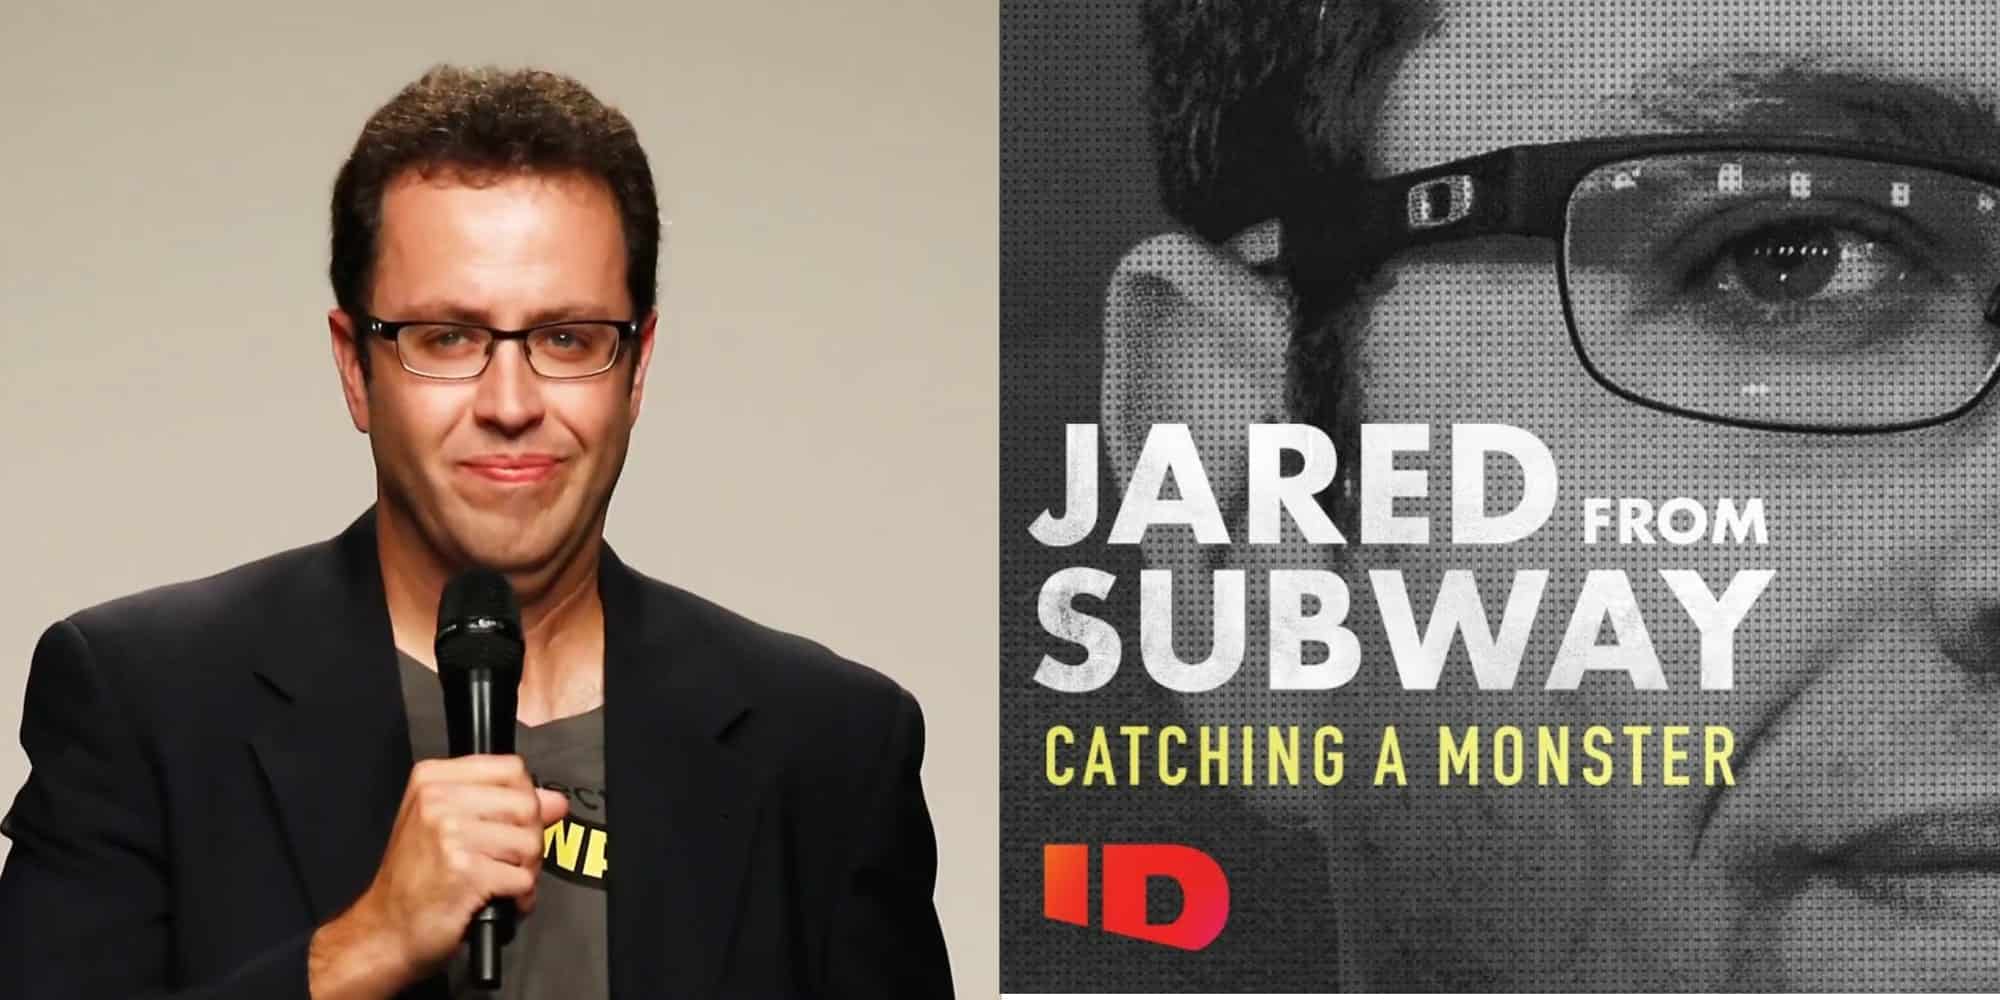 Jared From Subway: Catching a Monster, Jared Fogle